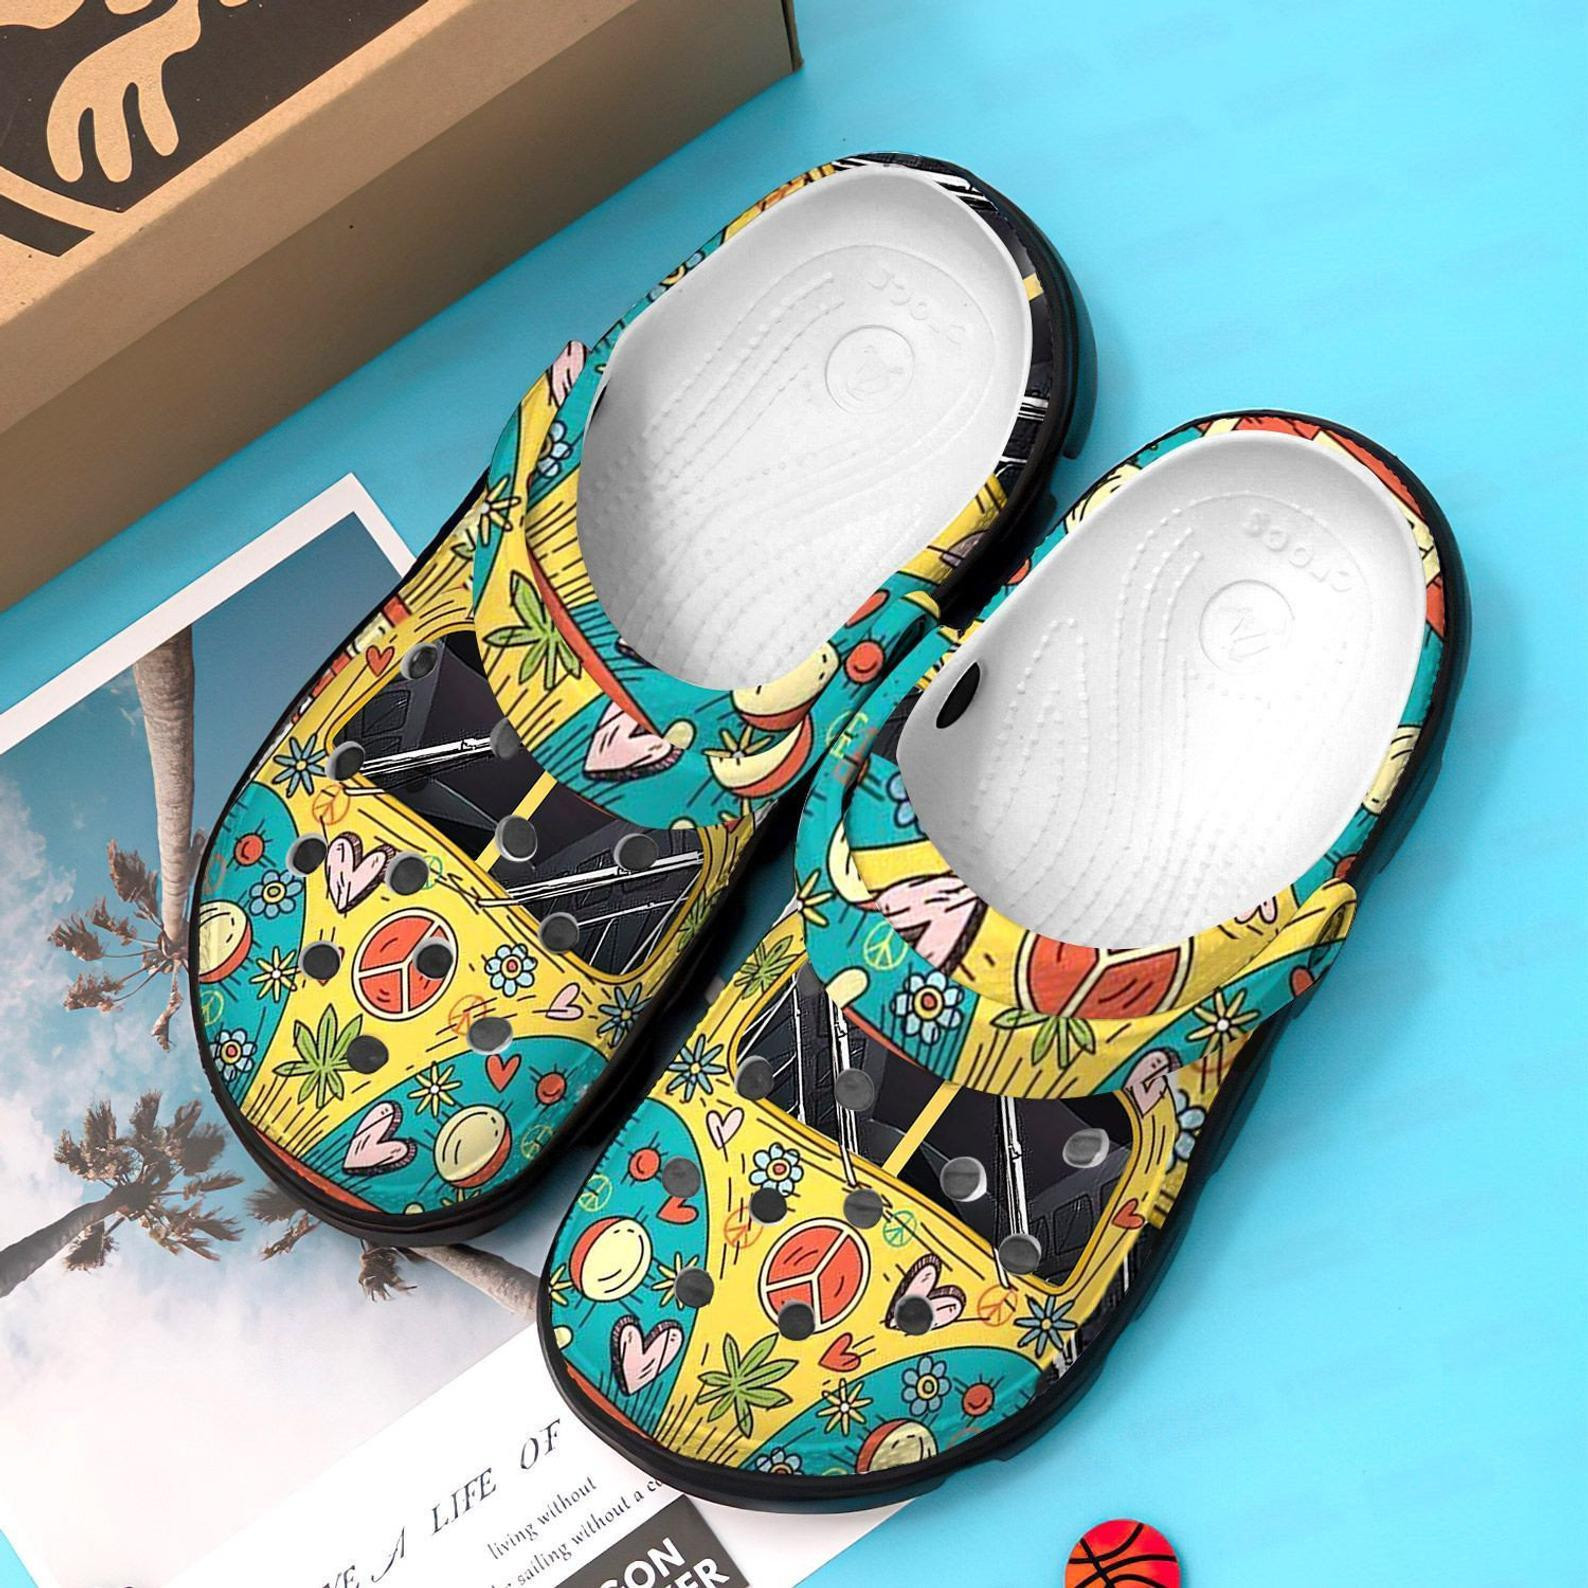 Hippie Car Crocs Shoes - Don Not Worry Be Happie Shoes Crocbland Clog Gifts For Boy Girl